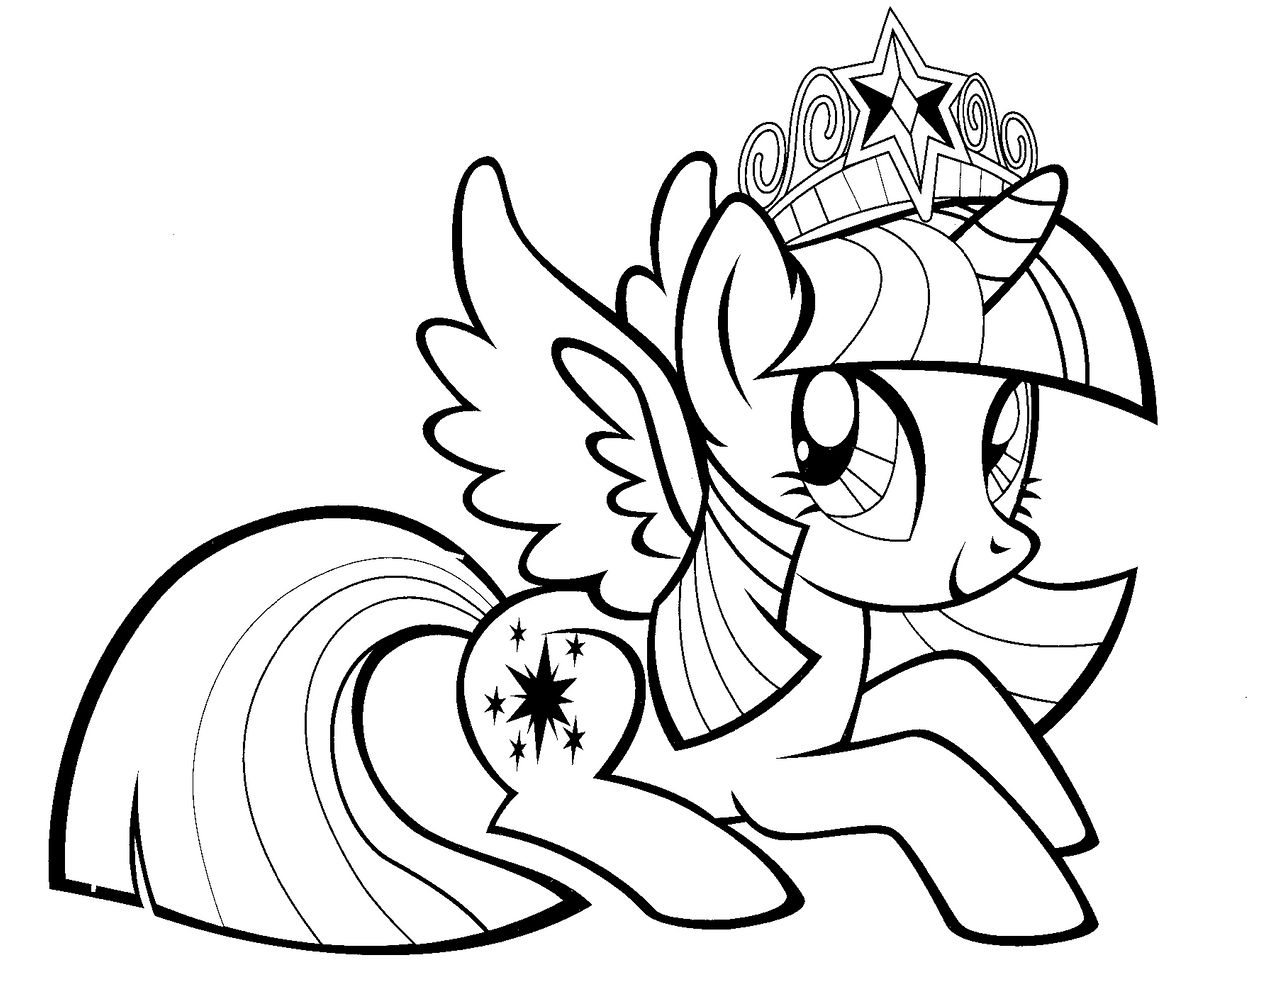 Mlp my little pony coloring page by magnificent